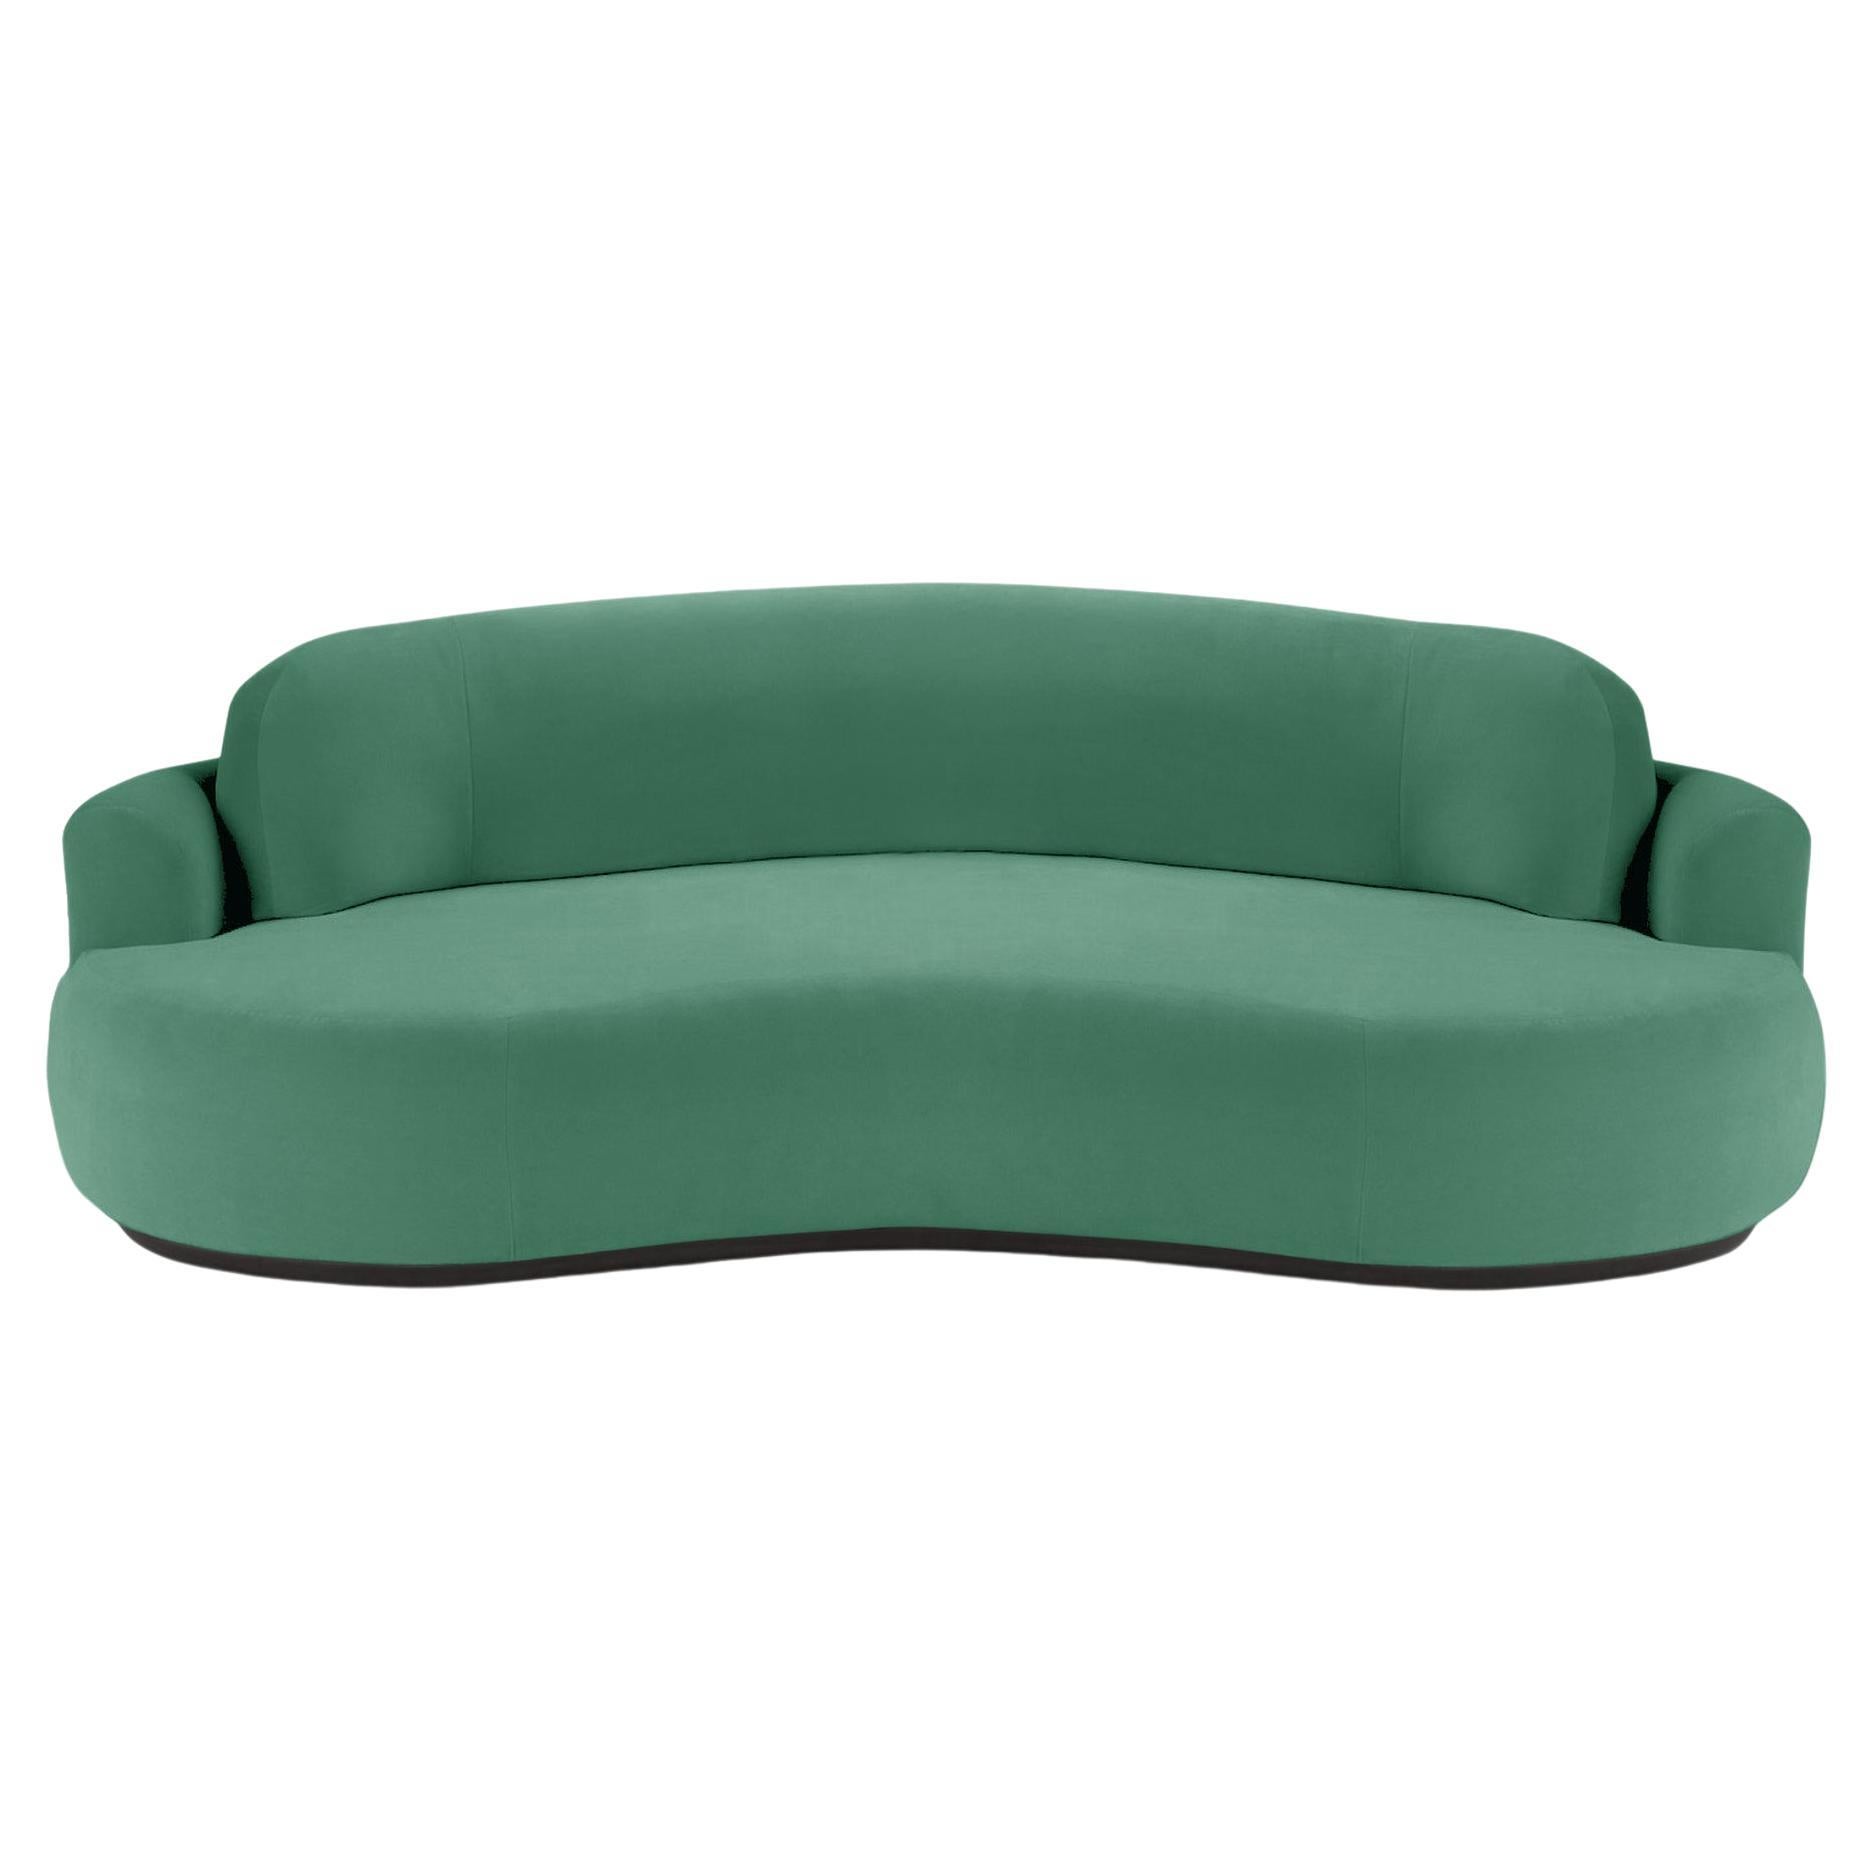 Naked Curved Sofa, Medium with Beech Ash-056-5 and Paris Green For Sale